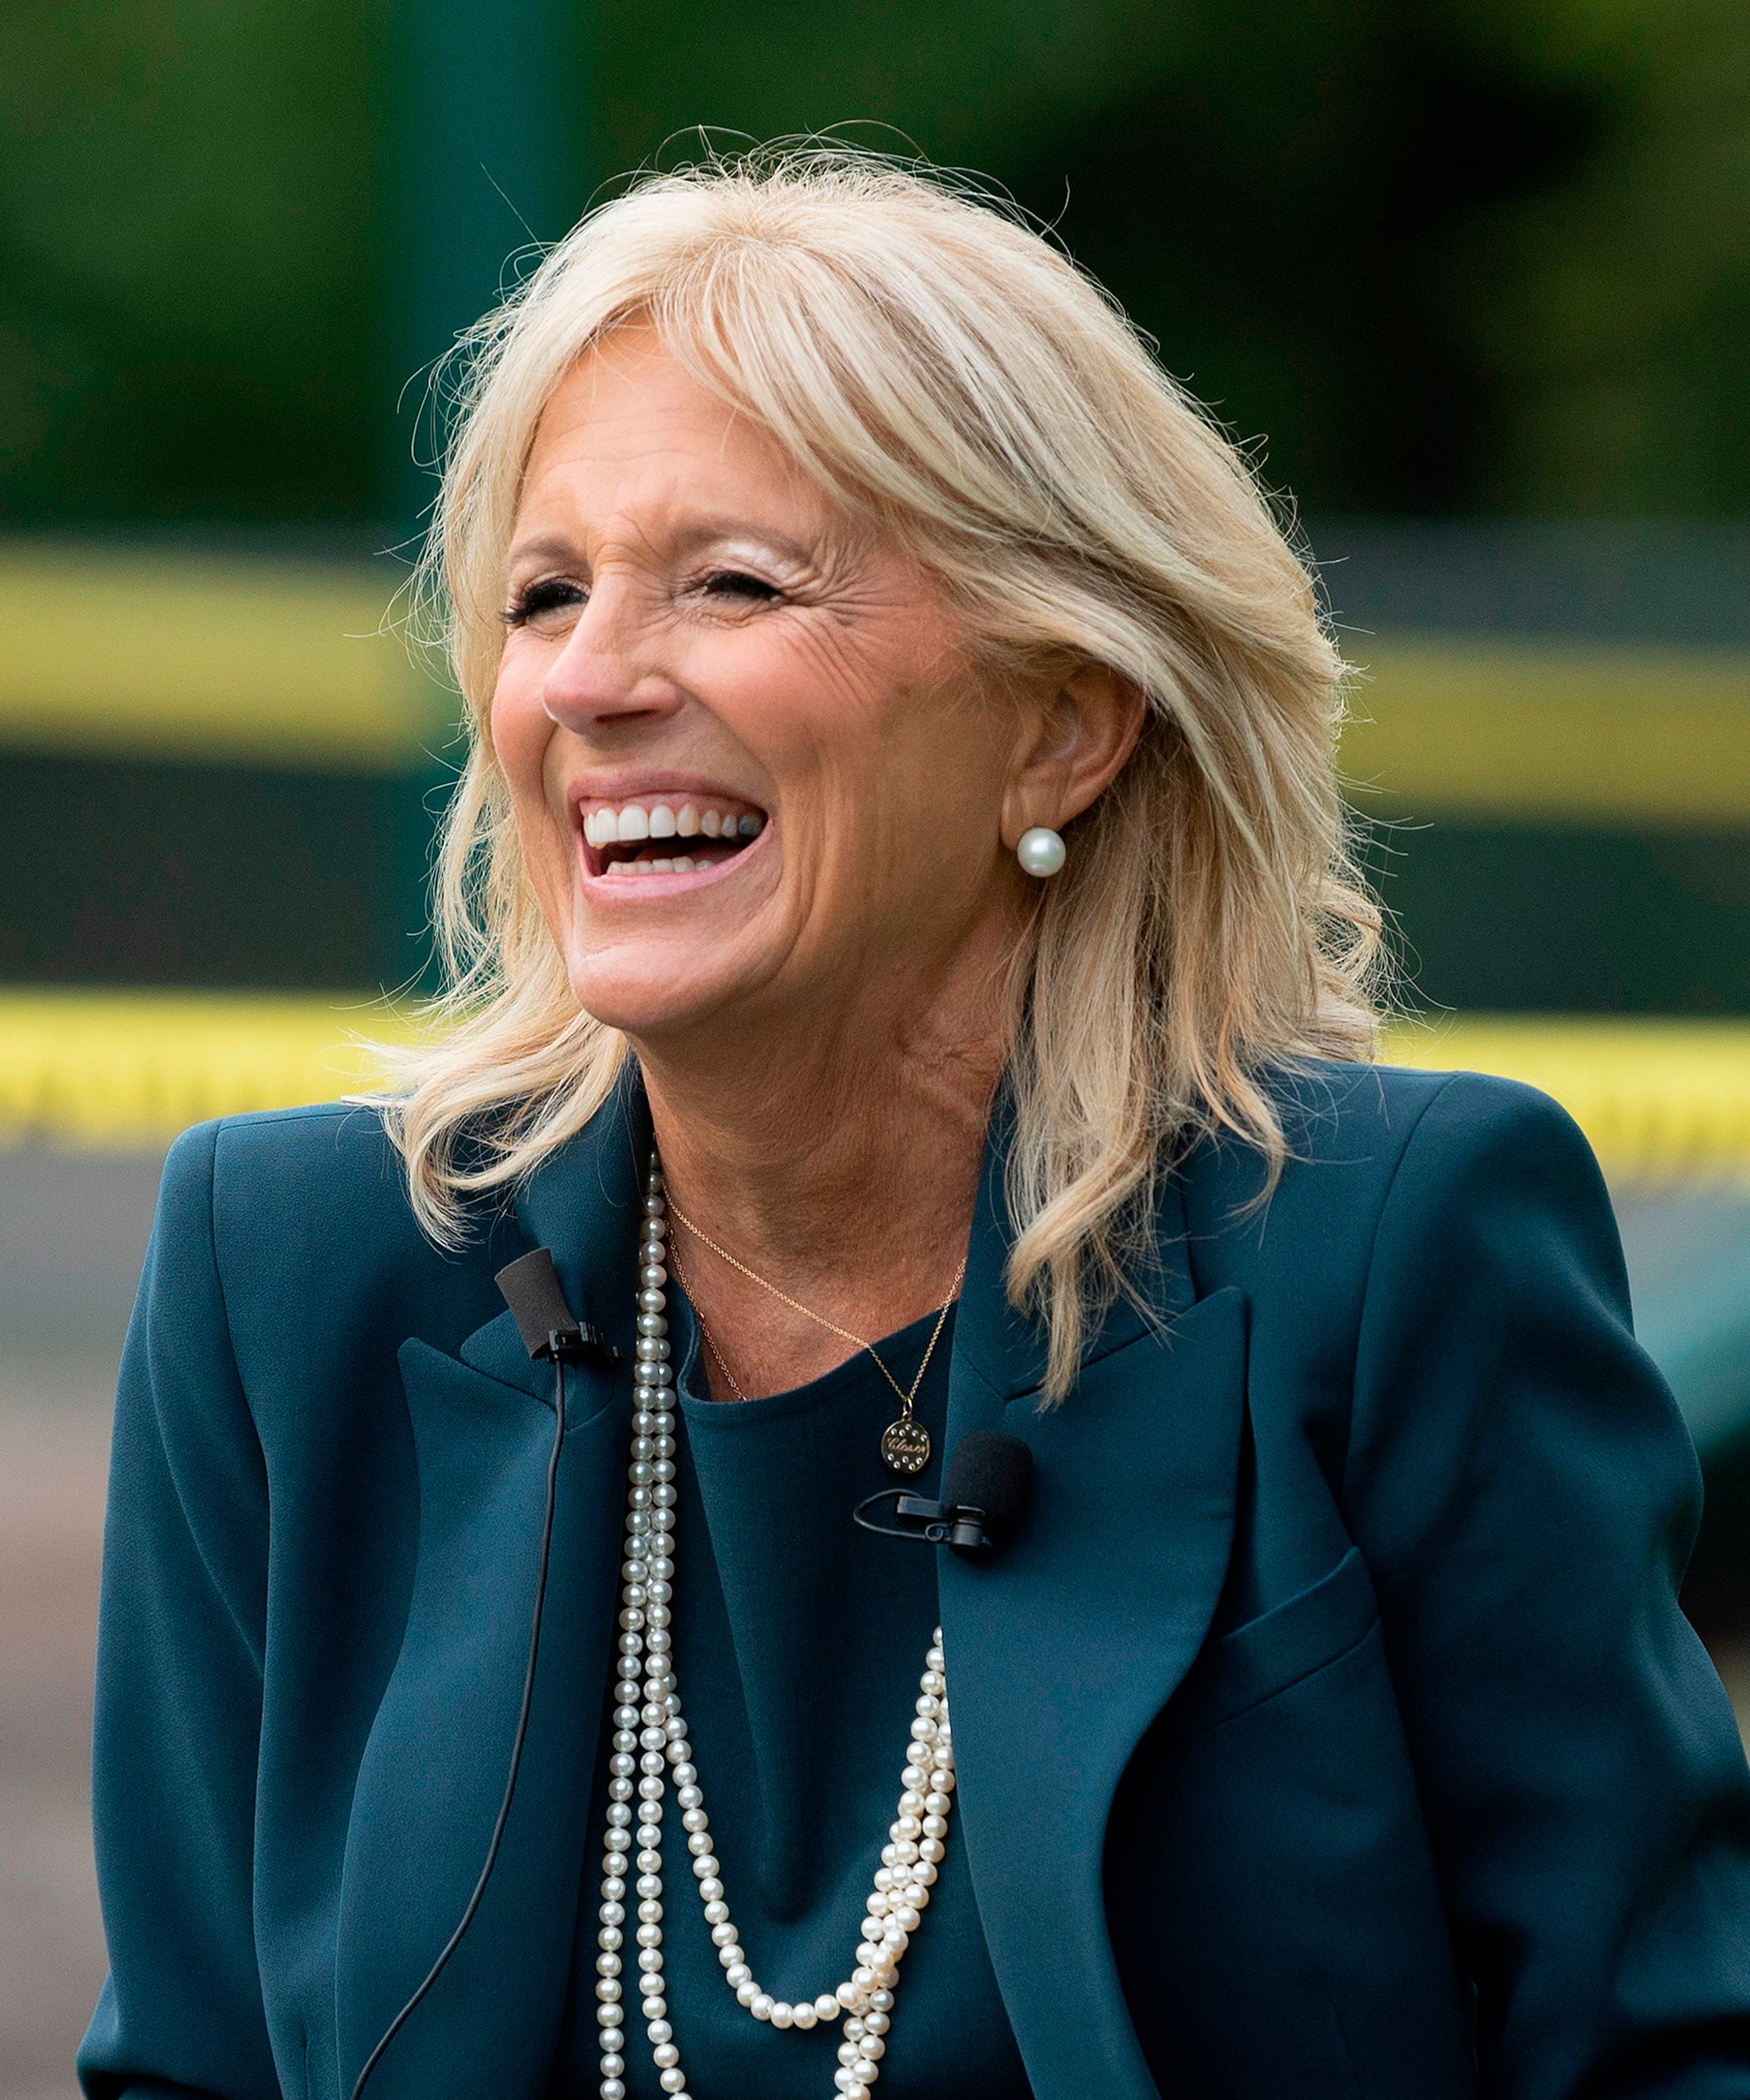 Apparently, Conservatives On Twitter Have A Problem With Jill Biden’s Tights